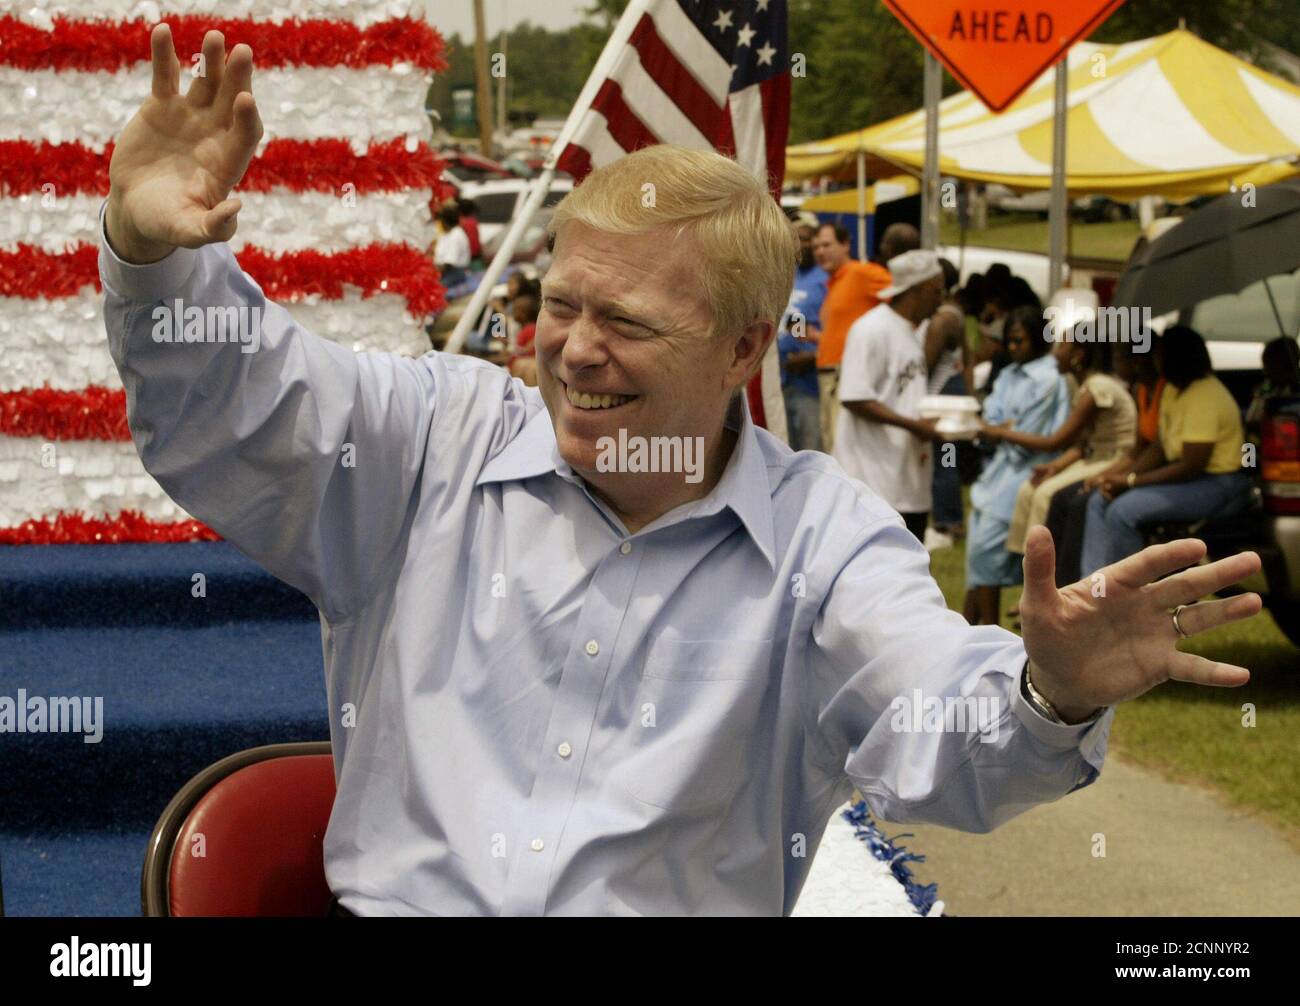 Democratic presidential hopeful Congressman Richard Gephardt of Missouri dances to the music as he rides past the Eastover, South Carolina bandstand on a float while serving as the Grand Marshall in the small town's parade May 3, 2003. Gephardt campaigned in Eastover before joining eight other Democratic presidential hopefuls later in the day in Columbia, South Carolina for the first candidates' debate of the 2004 U.S. presidential campaign. REUTERS/Jim Bourg  JRB Stock Photo